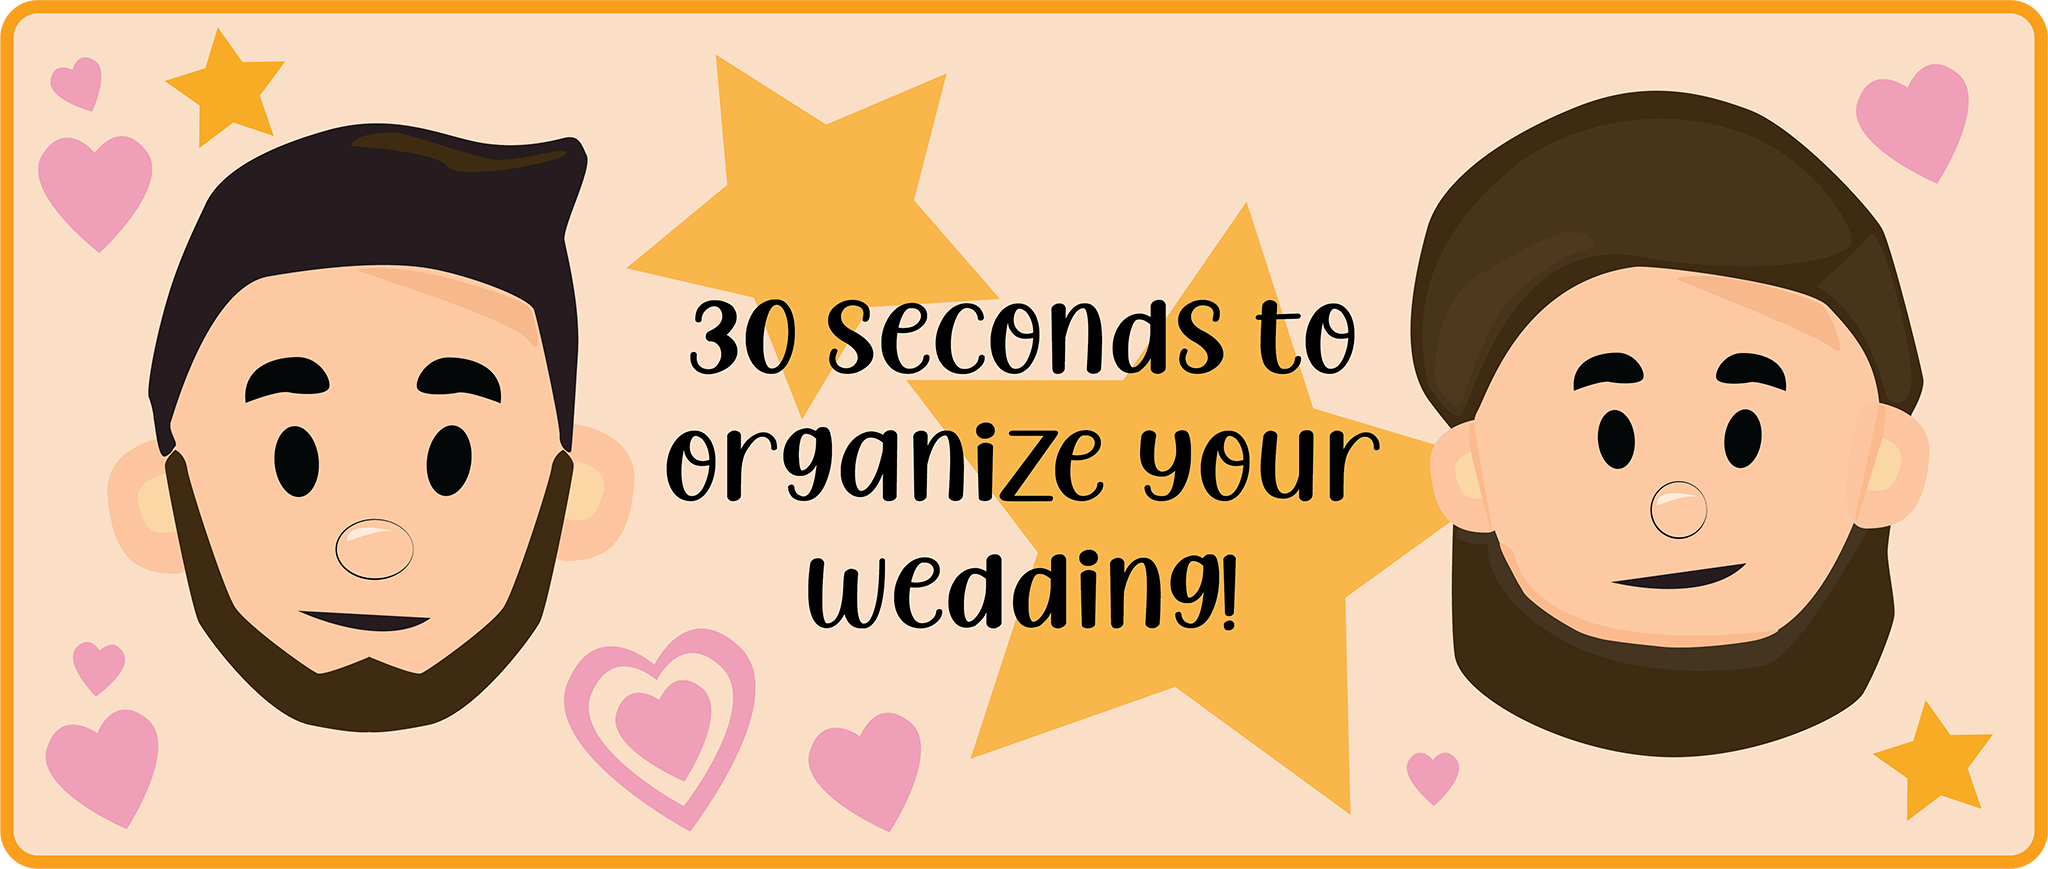 30 seconds to organize your wedding!